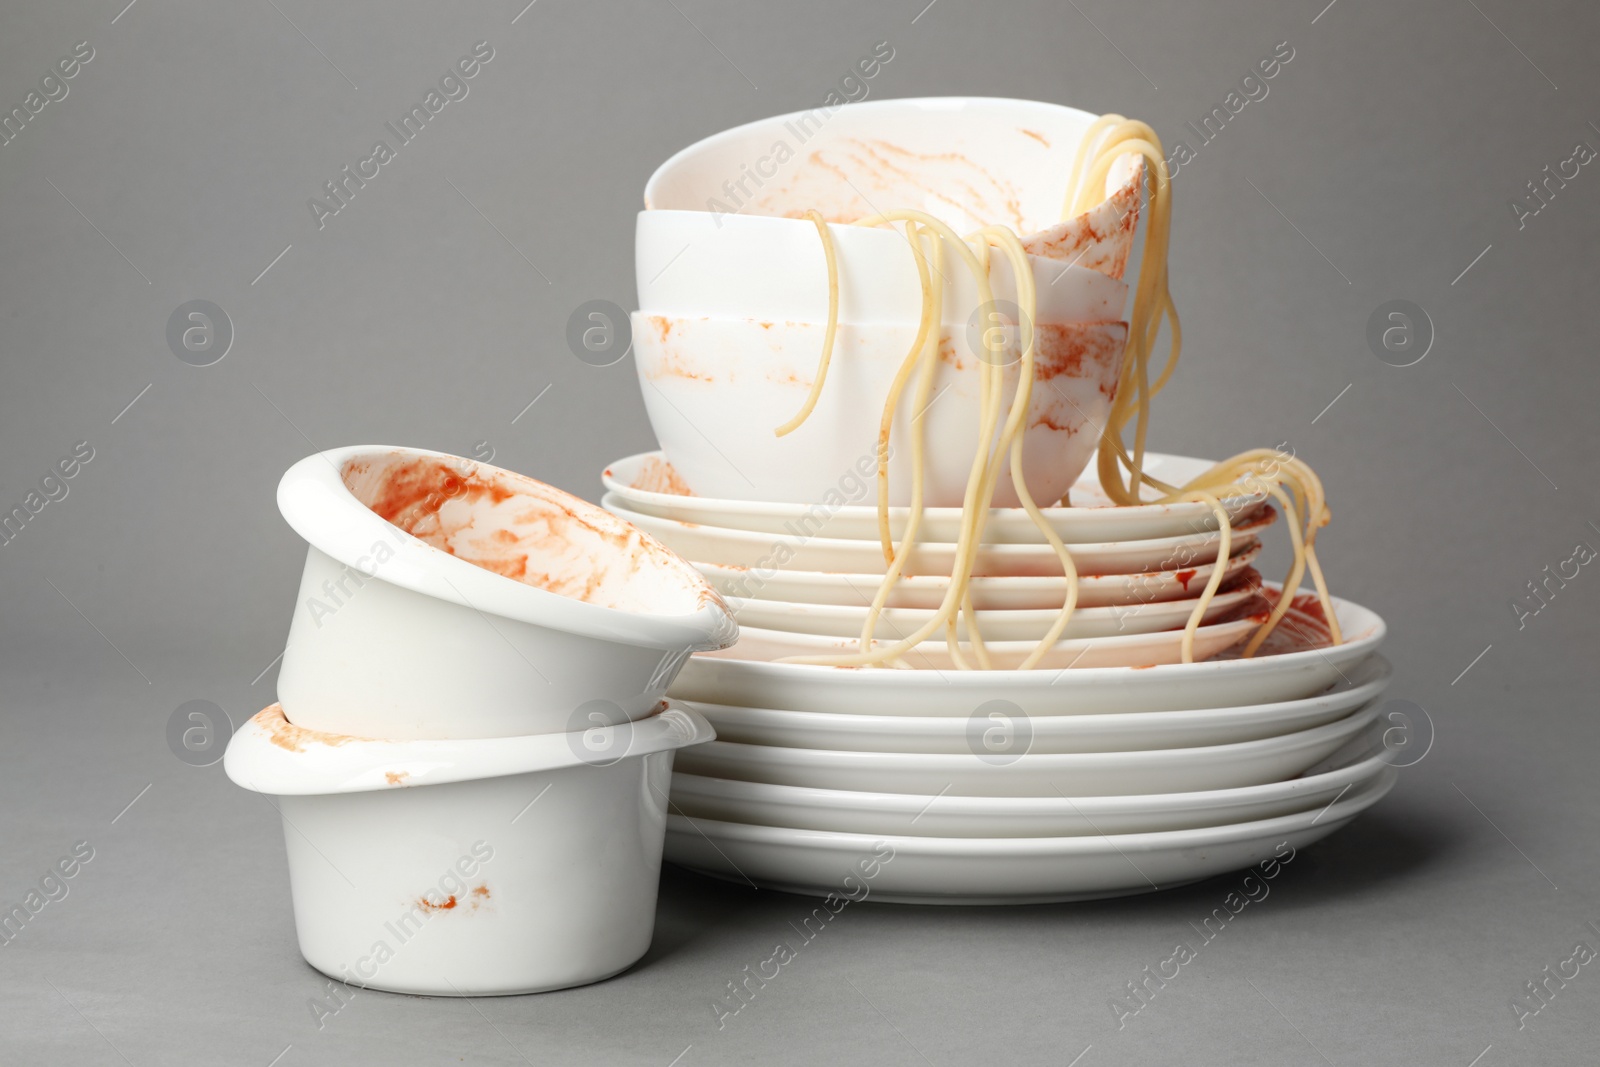 Photo of Set of dirty dishes with spaghetti leftovers on grey background